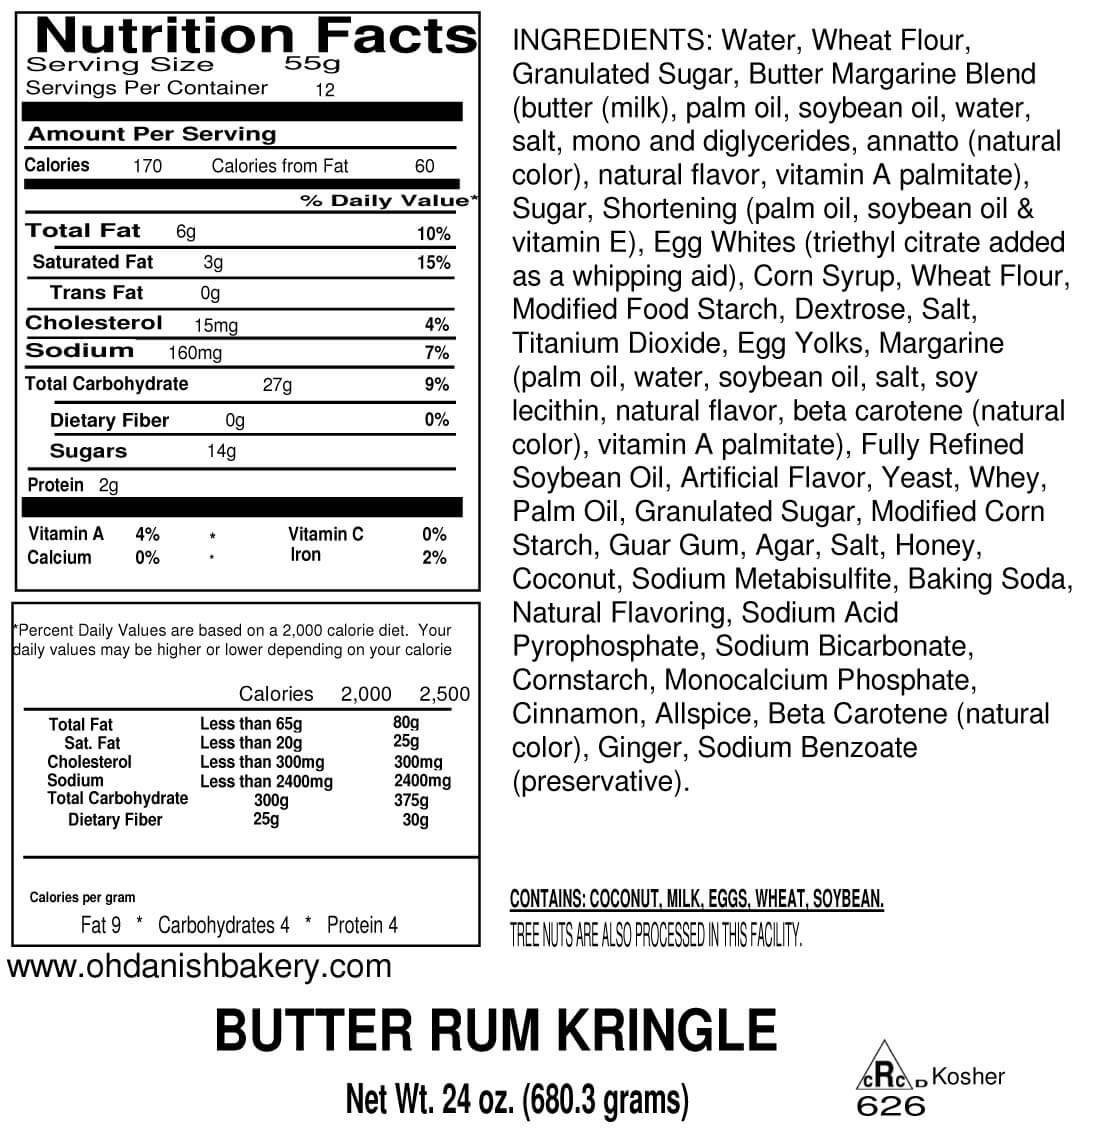 Nutritional Label for Butter Rum Kringle